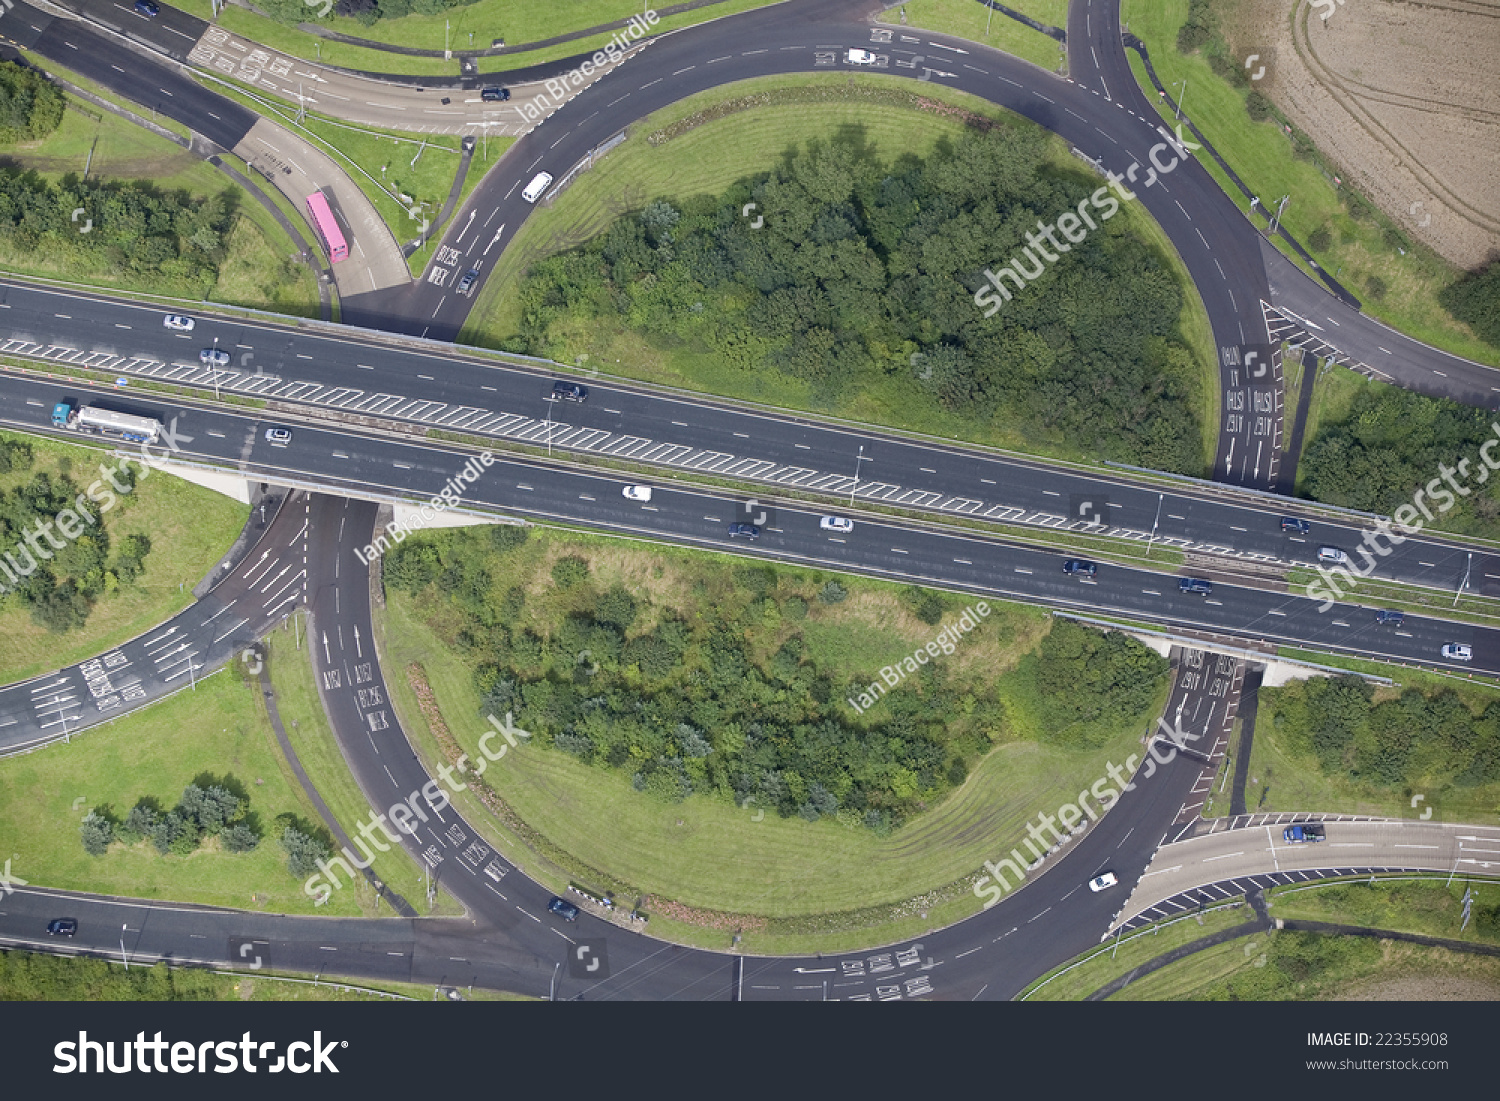 Aerial Image Of A Busy Road Junction In The North Of England. Stock ...